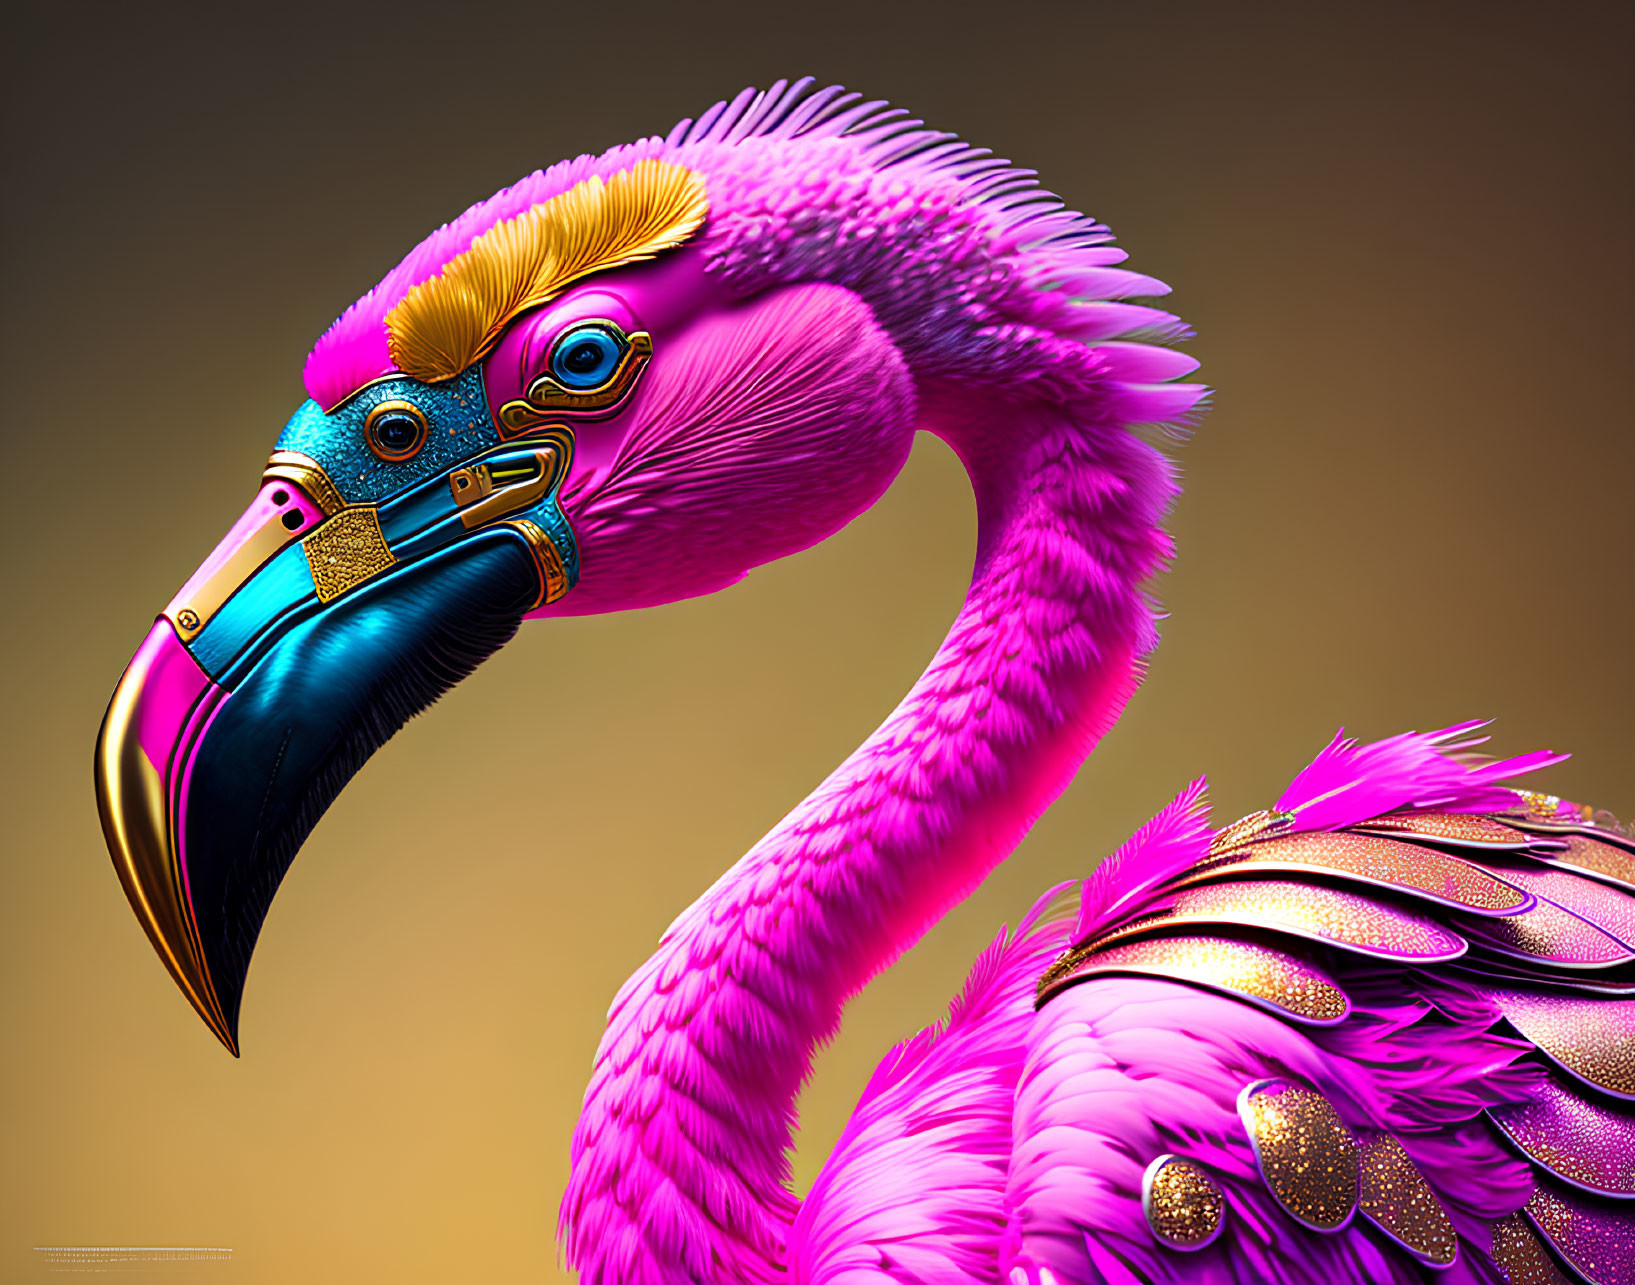 Stylized flamingo digital artwork with pink feathers and metallic gold accents